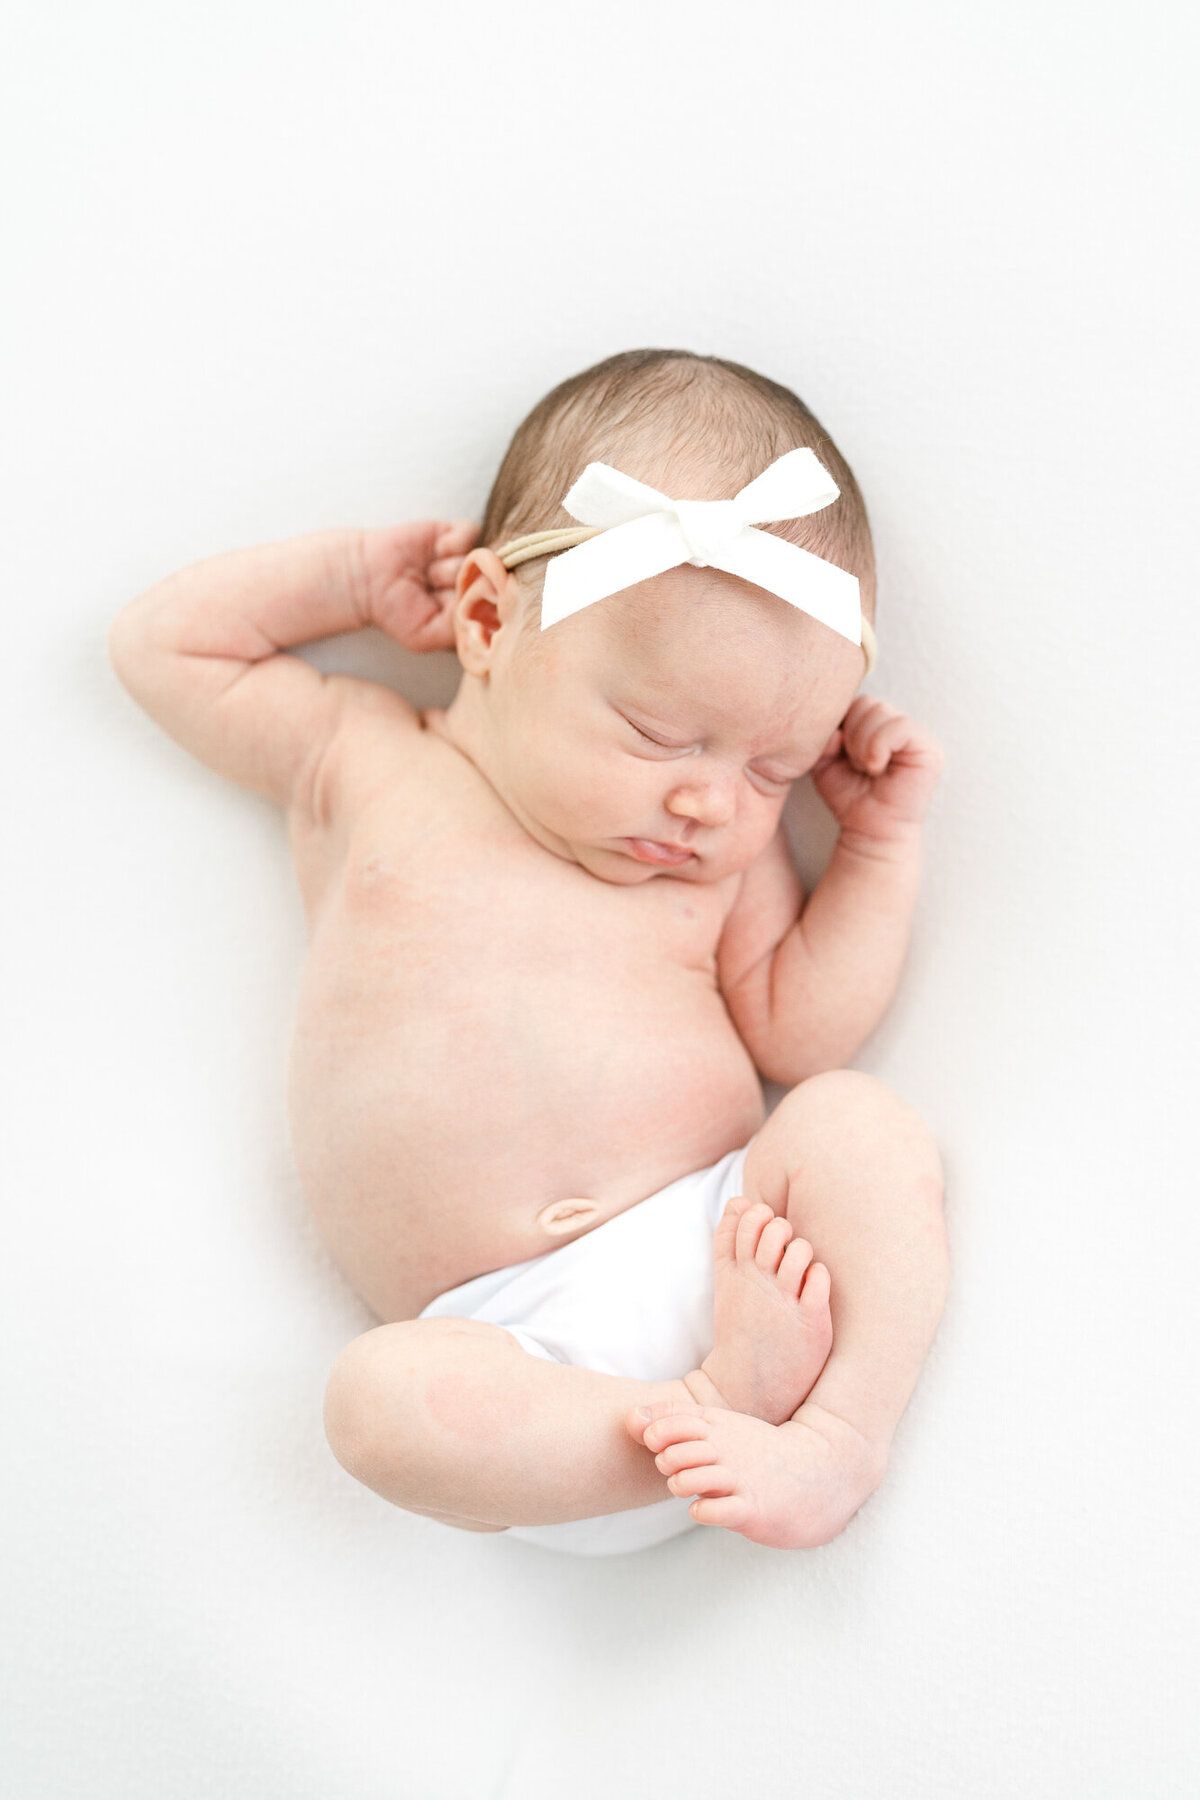 Lindsey Powell is a Newborn Photographer based in Marietta Georgia serving Atlanta and Beyond